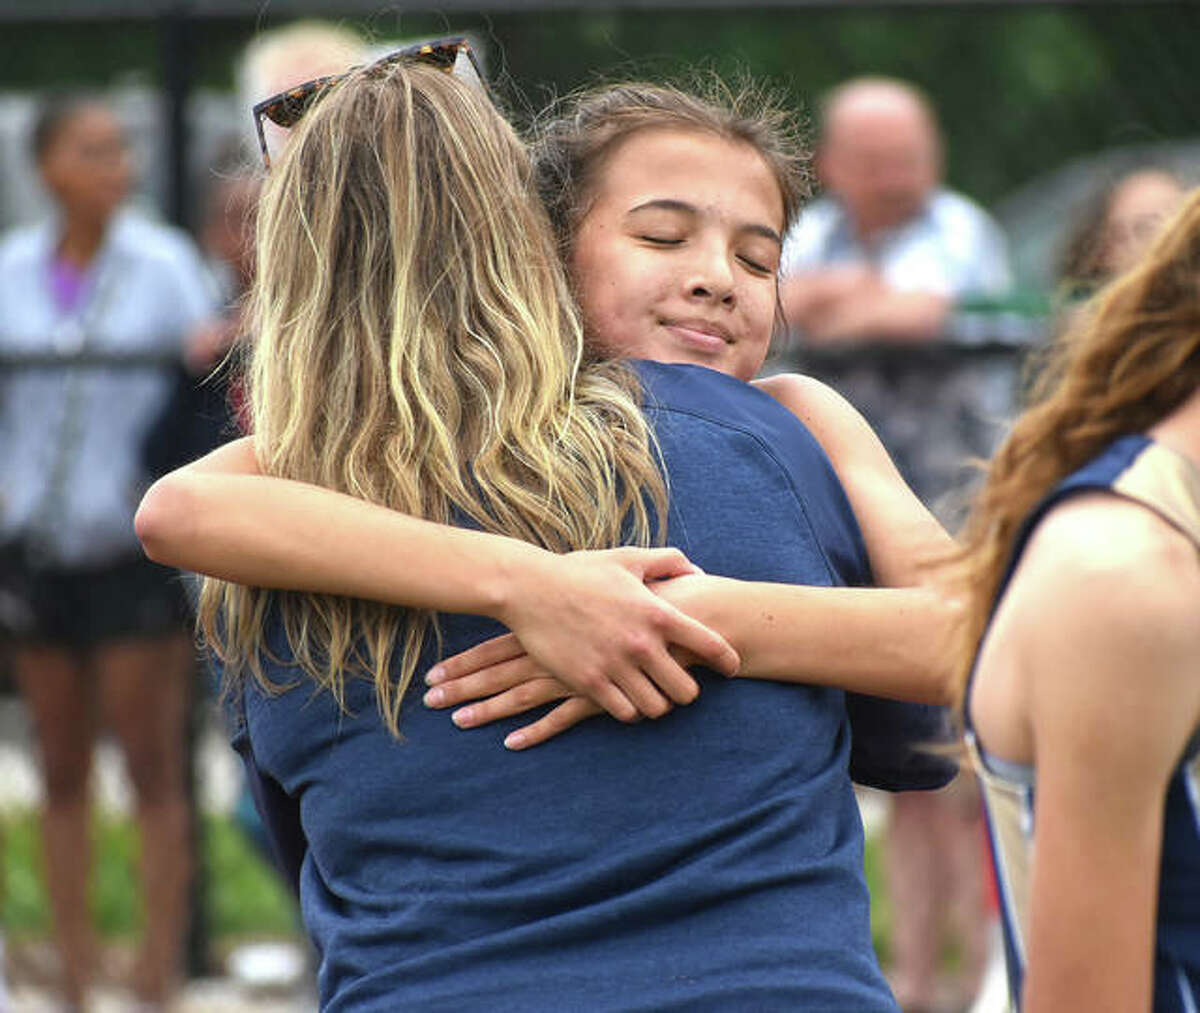 Father McGivney freshman Kaitlyn Hatley hugs a coach after her win in the 800-meter run at the Class 1A Belleville Althoff Sectional.